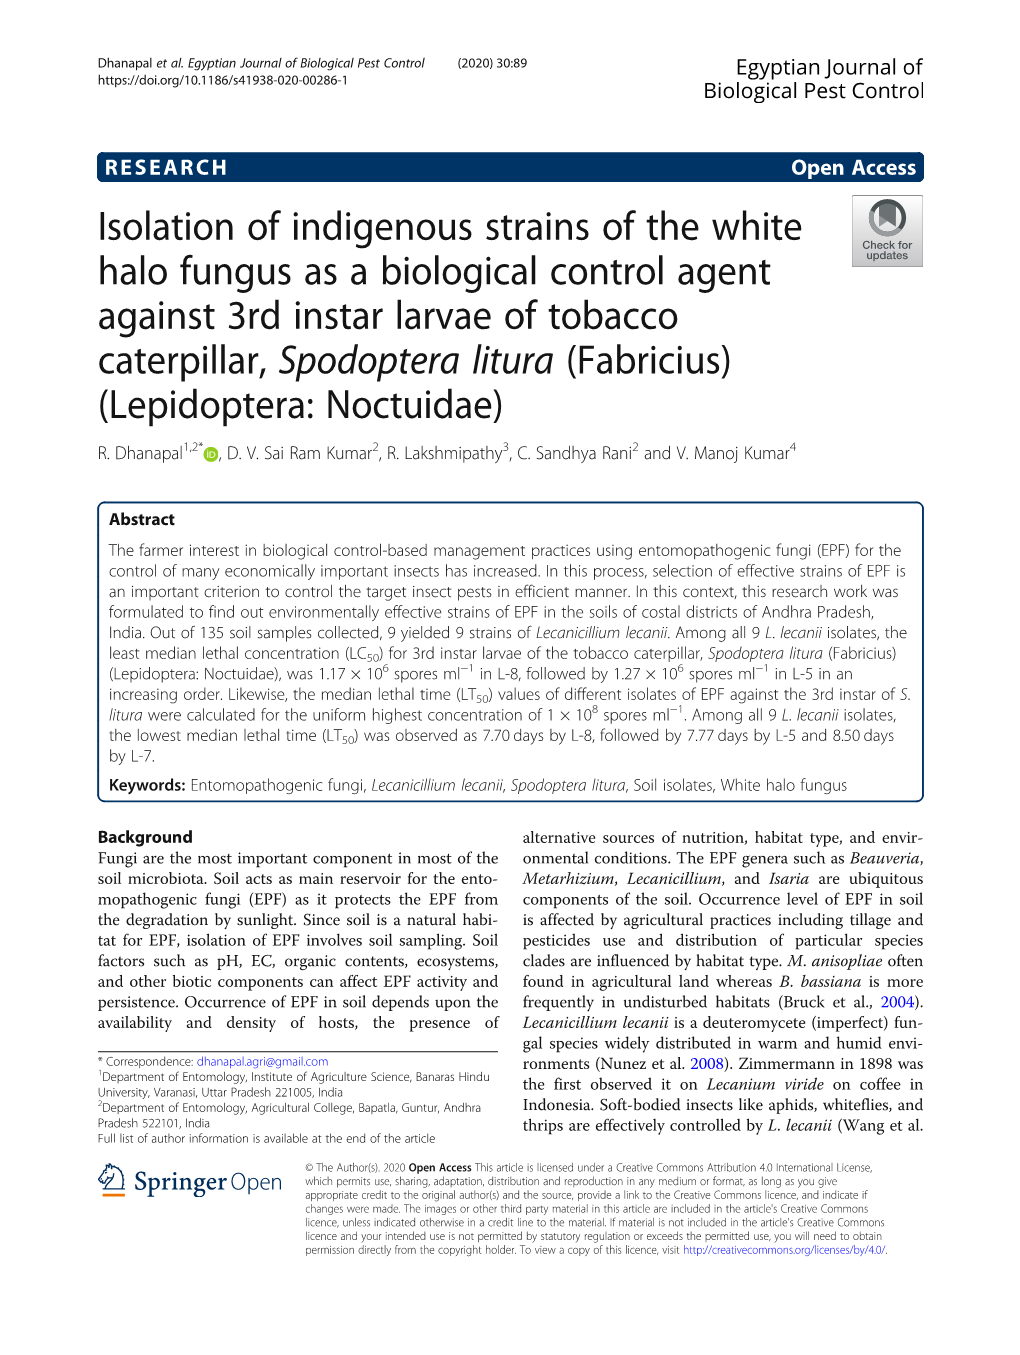 Isolation of Indigenous Strains of the White Halo Fungus As a Biological